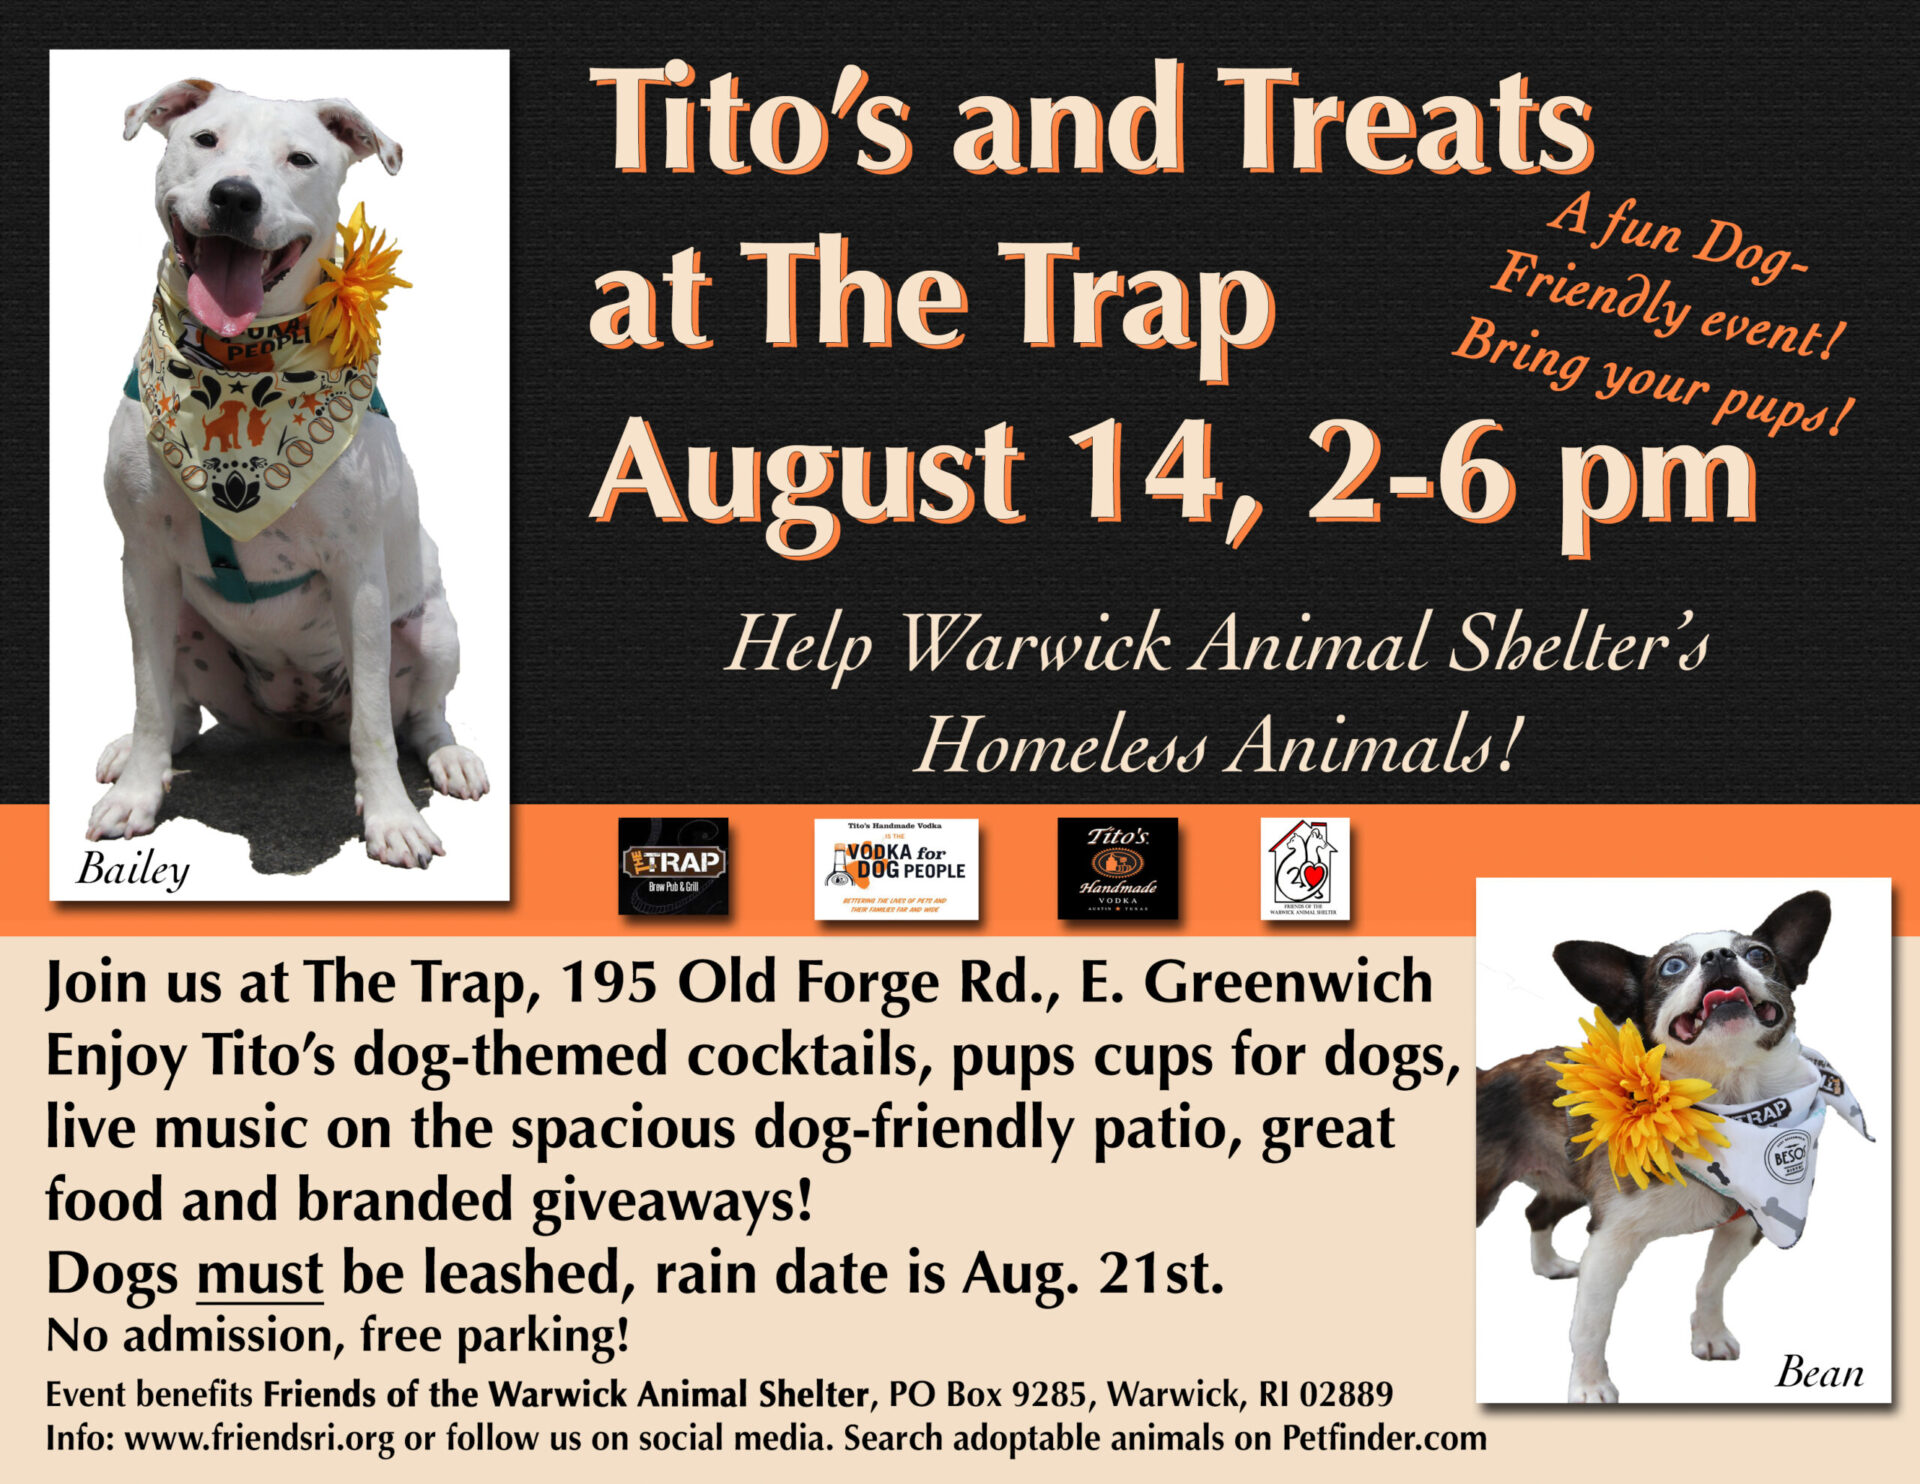 [CREDIT: The Trap] The Tito’s and Treats fundraiser for The Warwick Animal Shelter will be at The Trap at 195 Old Forge Road, East Greenwich, RI, Aug. 14. 